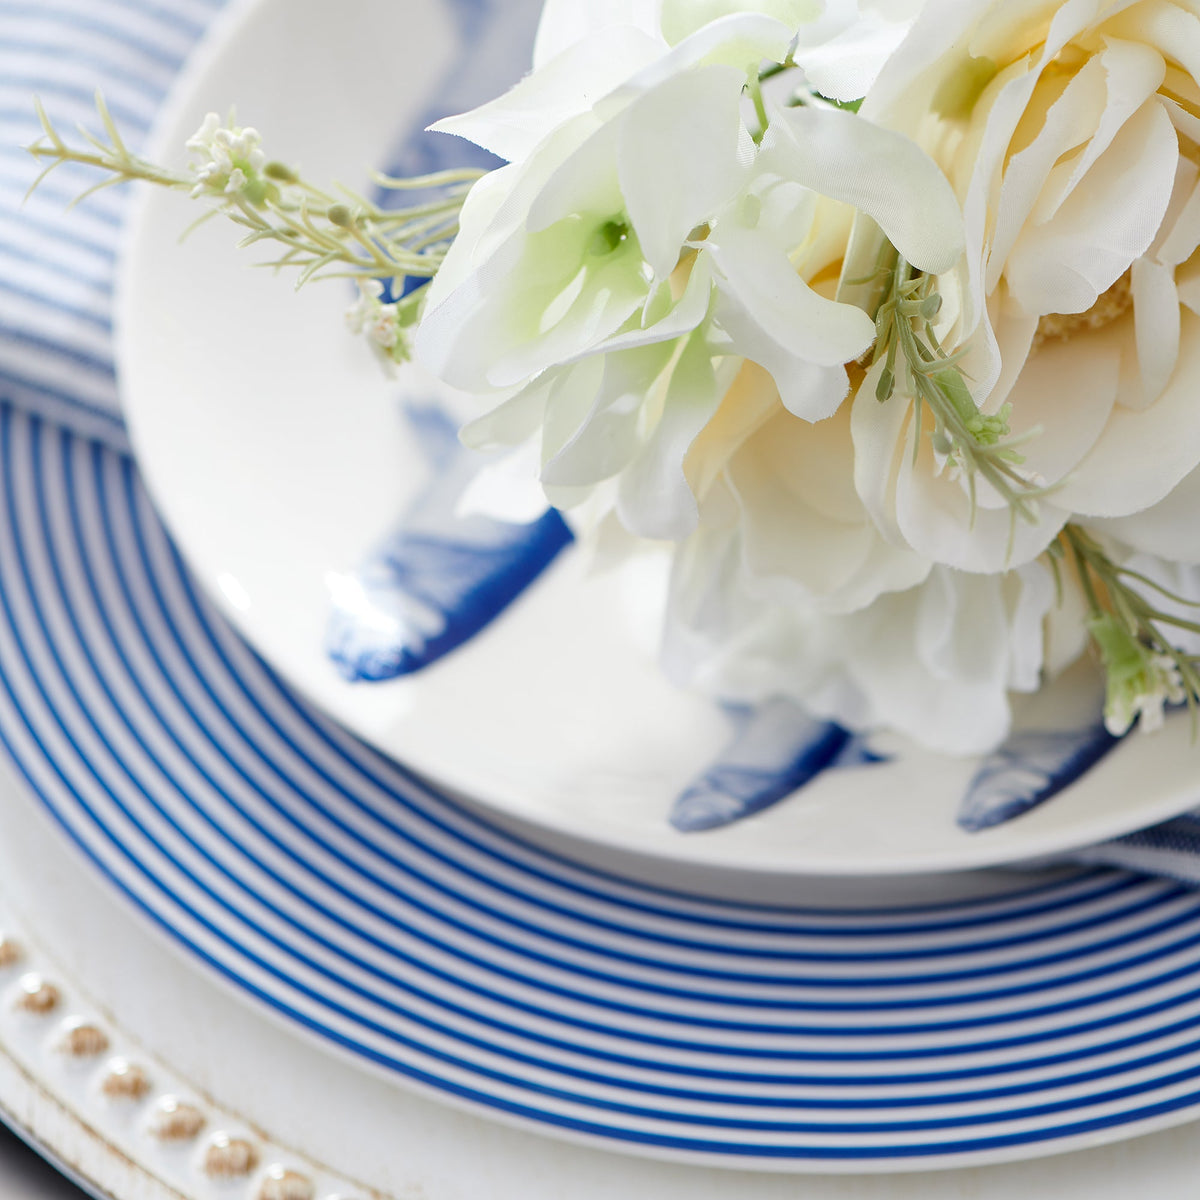 A Newport Racing Stripe Rimmed Dinner Plate with a blue and white flower on it by Caskata Artisanal Home.